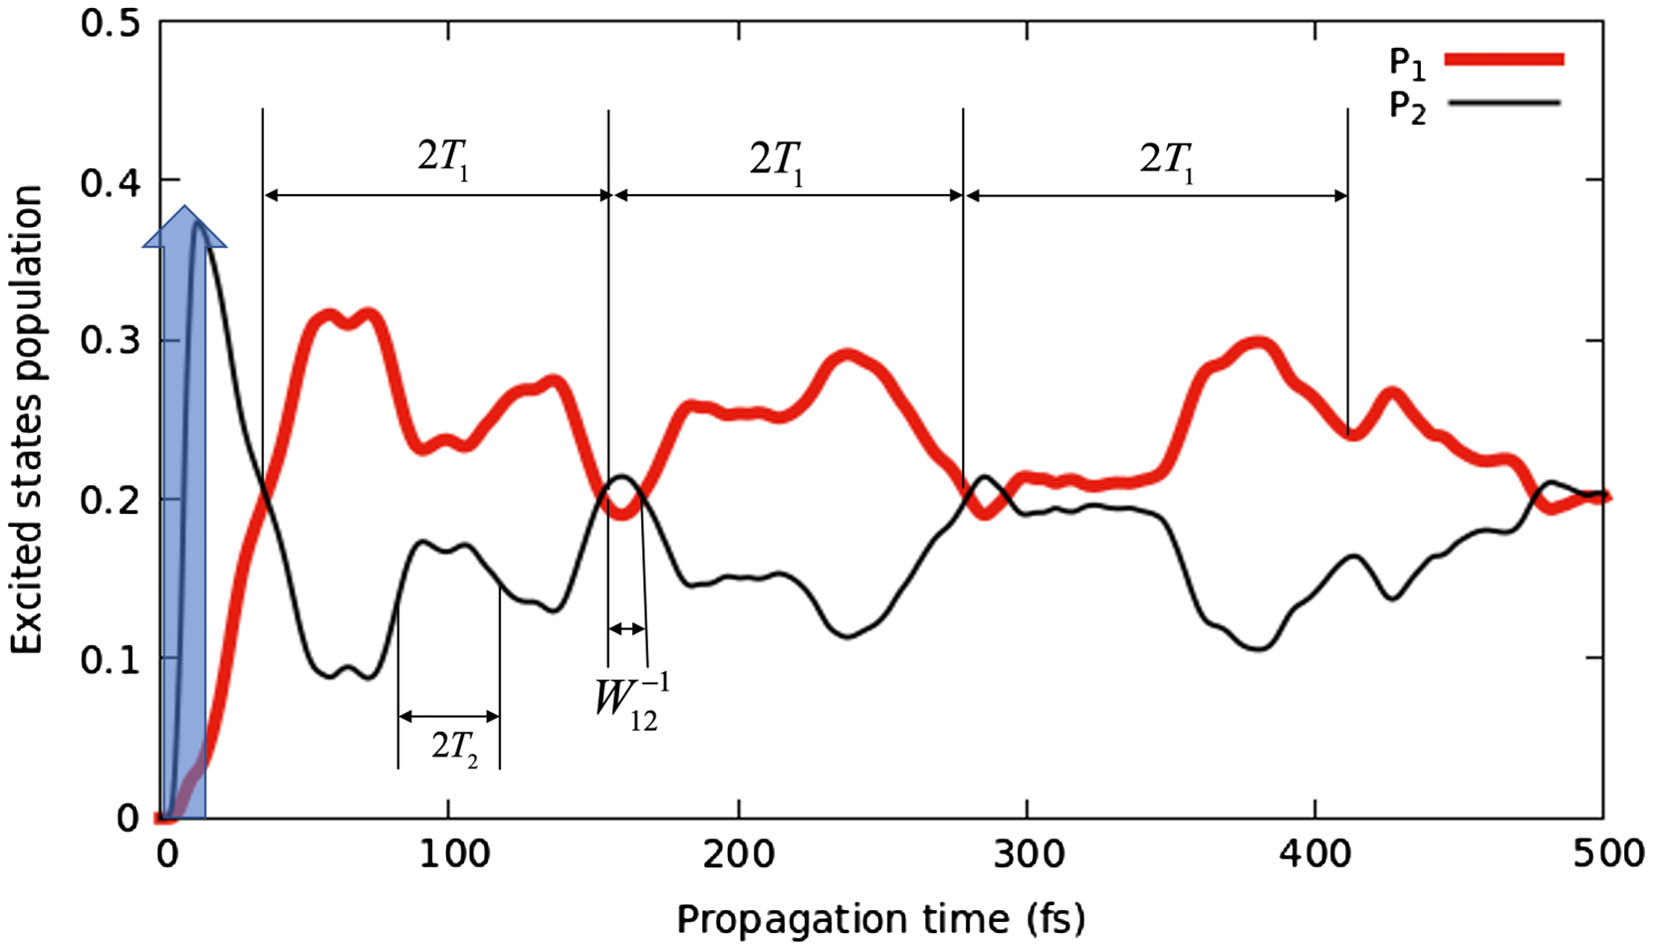 Excited states populations as a function of propagation time in a minimal 2D model involving the CI branching space. P2 and P1 are, respectively, indicated by thin black and thick red solid lines. The blue vertical arrow at t = 0 symbolizes the vertical launching of the v = 0 wavepacket from the initial state S0. T1 and T2 are, respectively, the vibrational periods of the excited states S1 and S2. W12−1 is a notation for the CI characteristic transfer time.